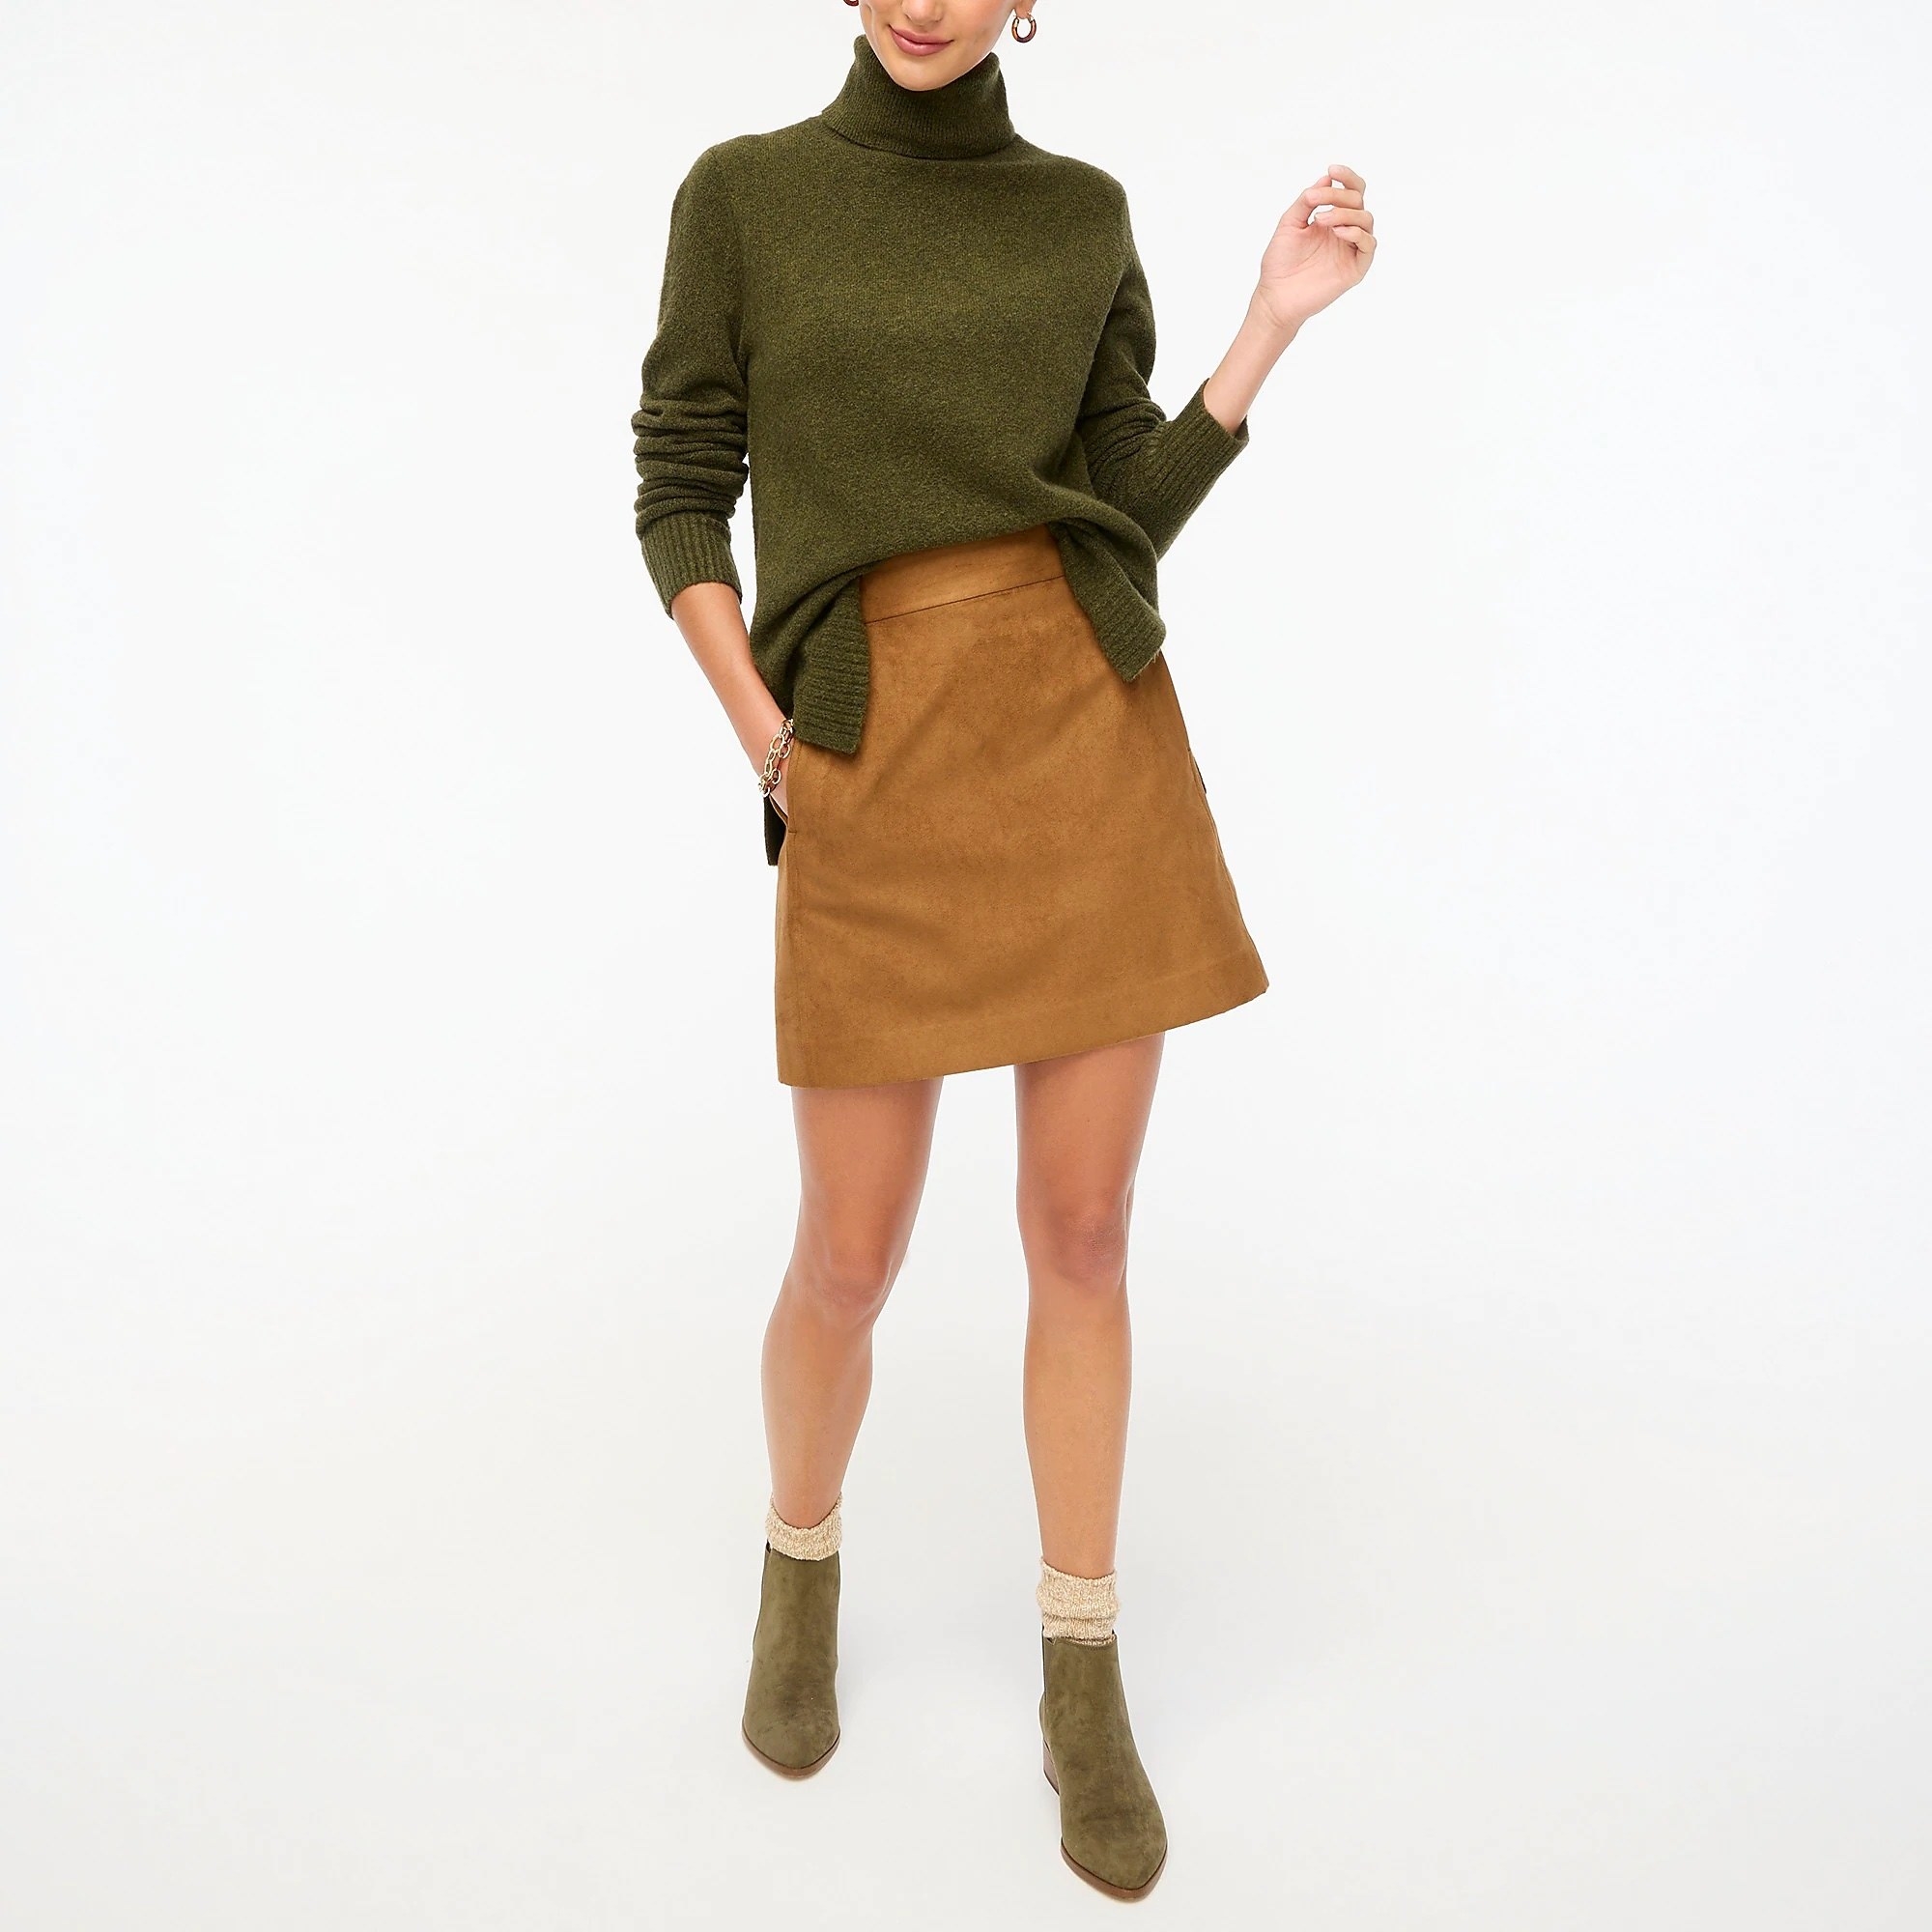 model in an olive green turtleneck sweater with side slits